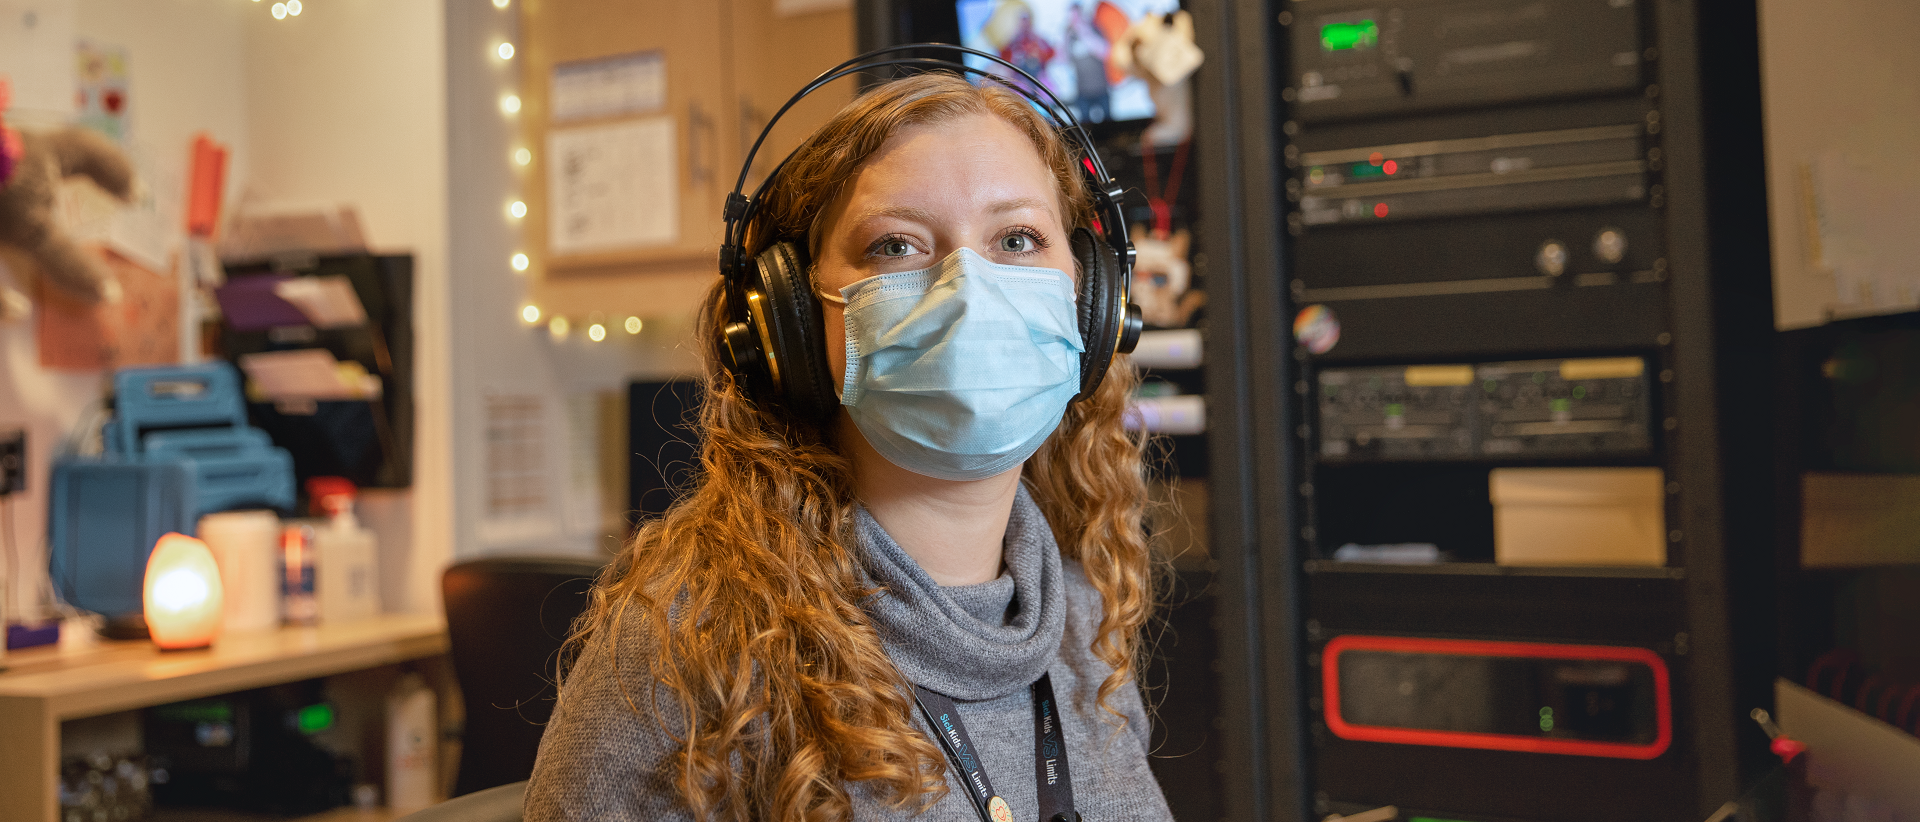 Staff member wearing headphones and a surgical mask sits at a desk with technical equipment in the background.